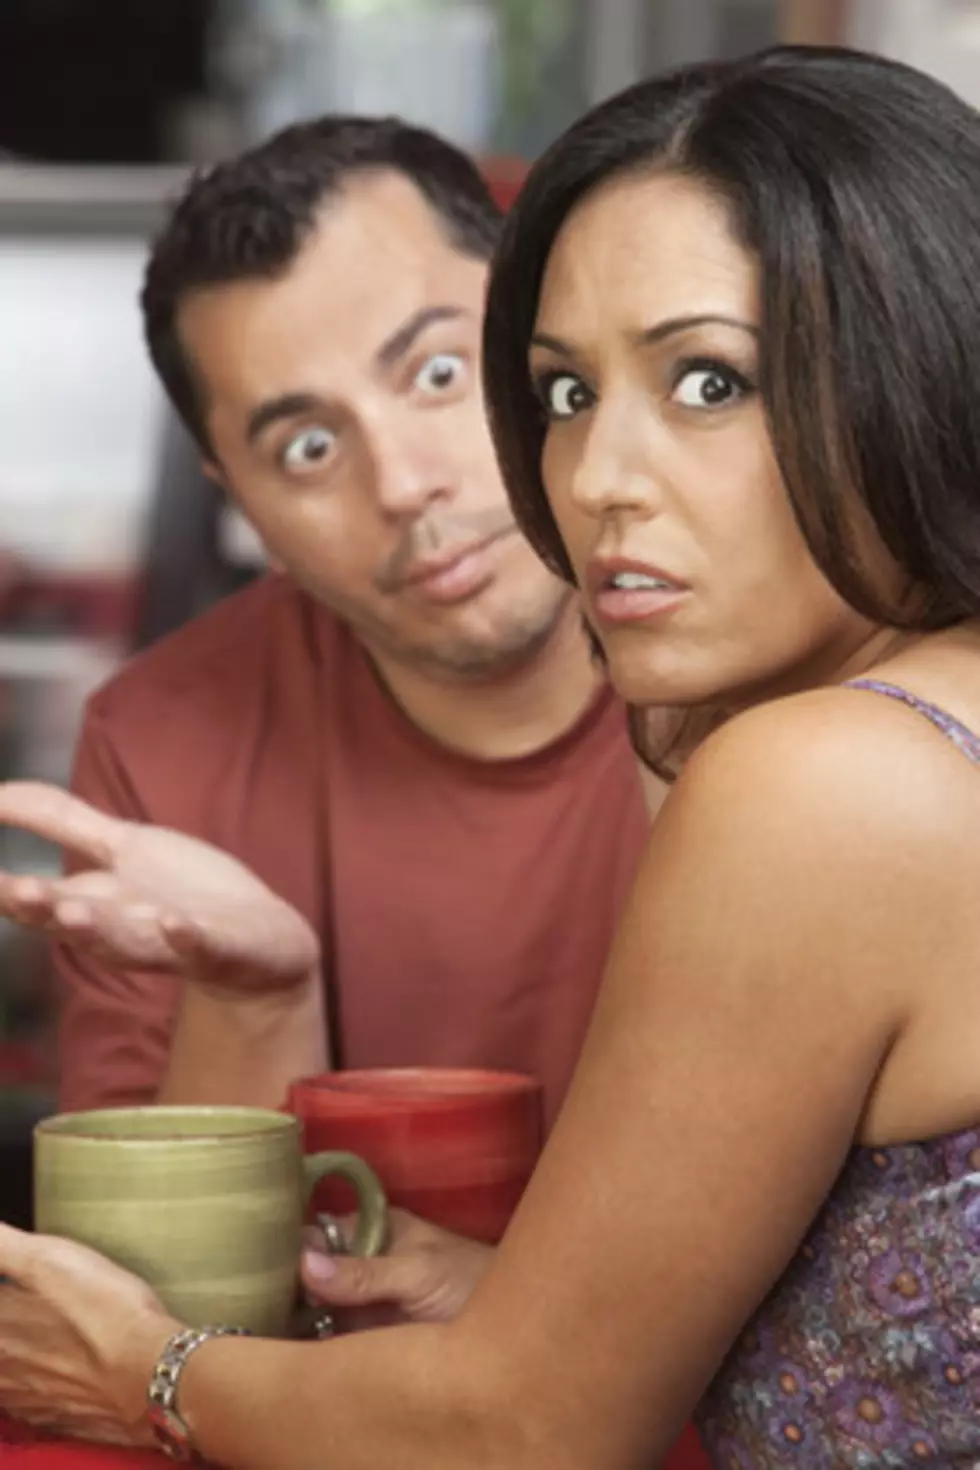 Would You Tell a Friend Their Significant Other Was Cheating On Them? [Poll]